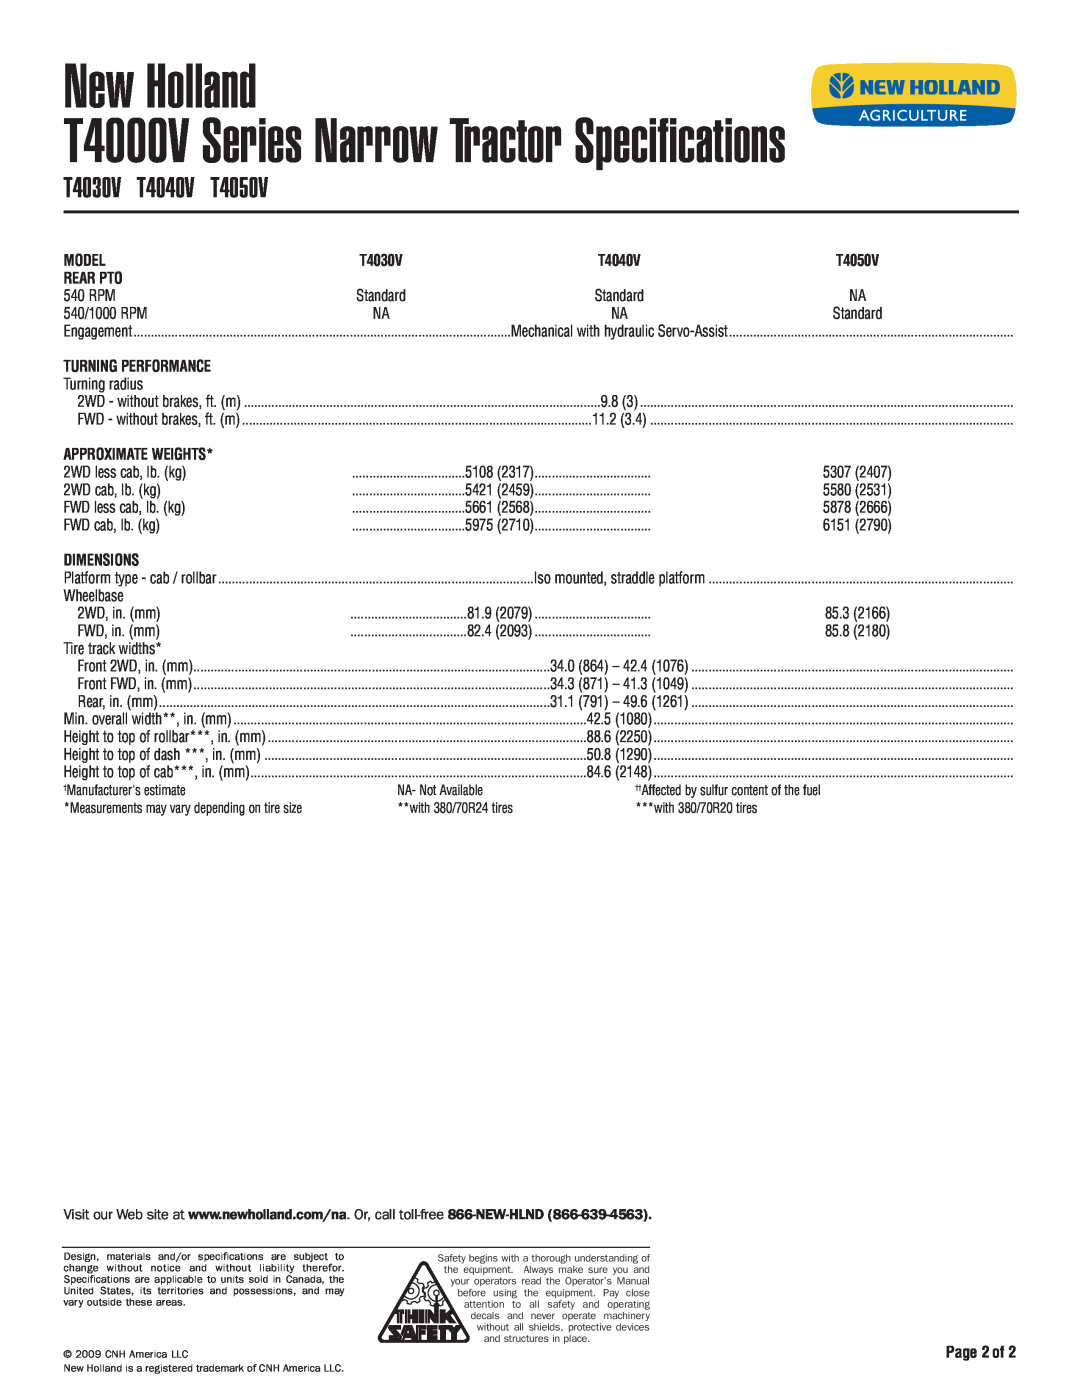 New Holland T4030V Turning Performance, Approximate Weights, Dimensions, Page 2of, New Holland, T4050V, T4040V, Model 